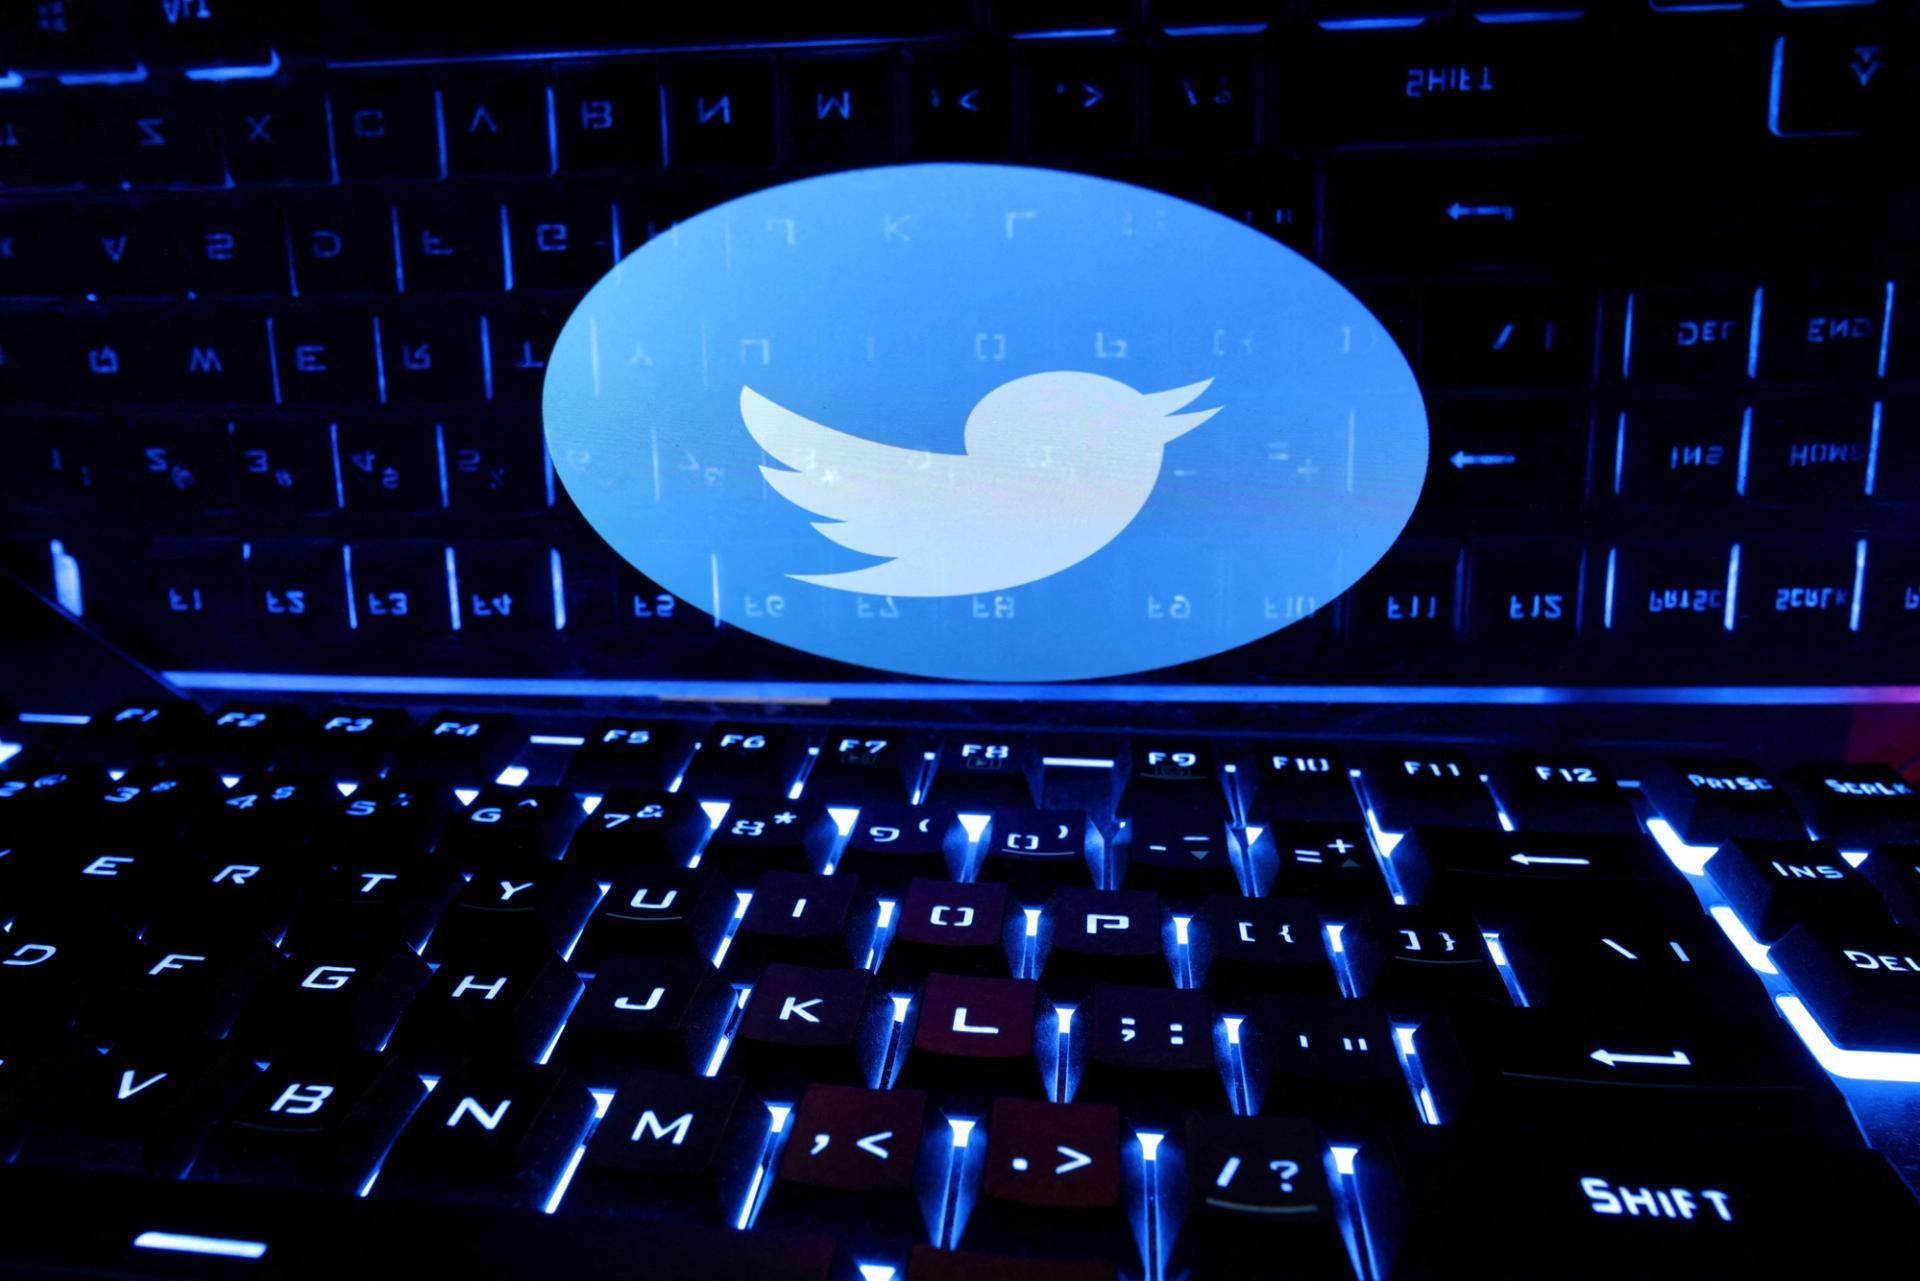 A keyboard is placed in front of a displayed Twitter logo.